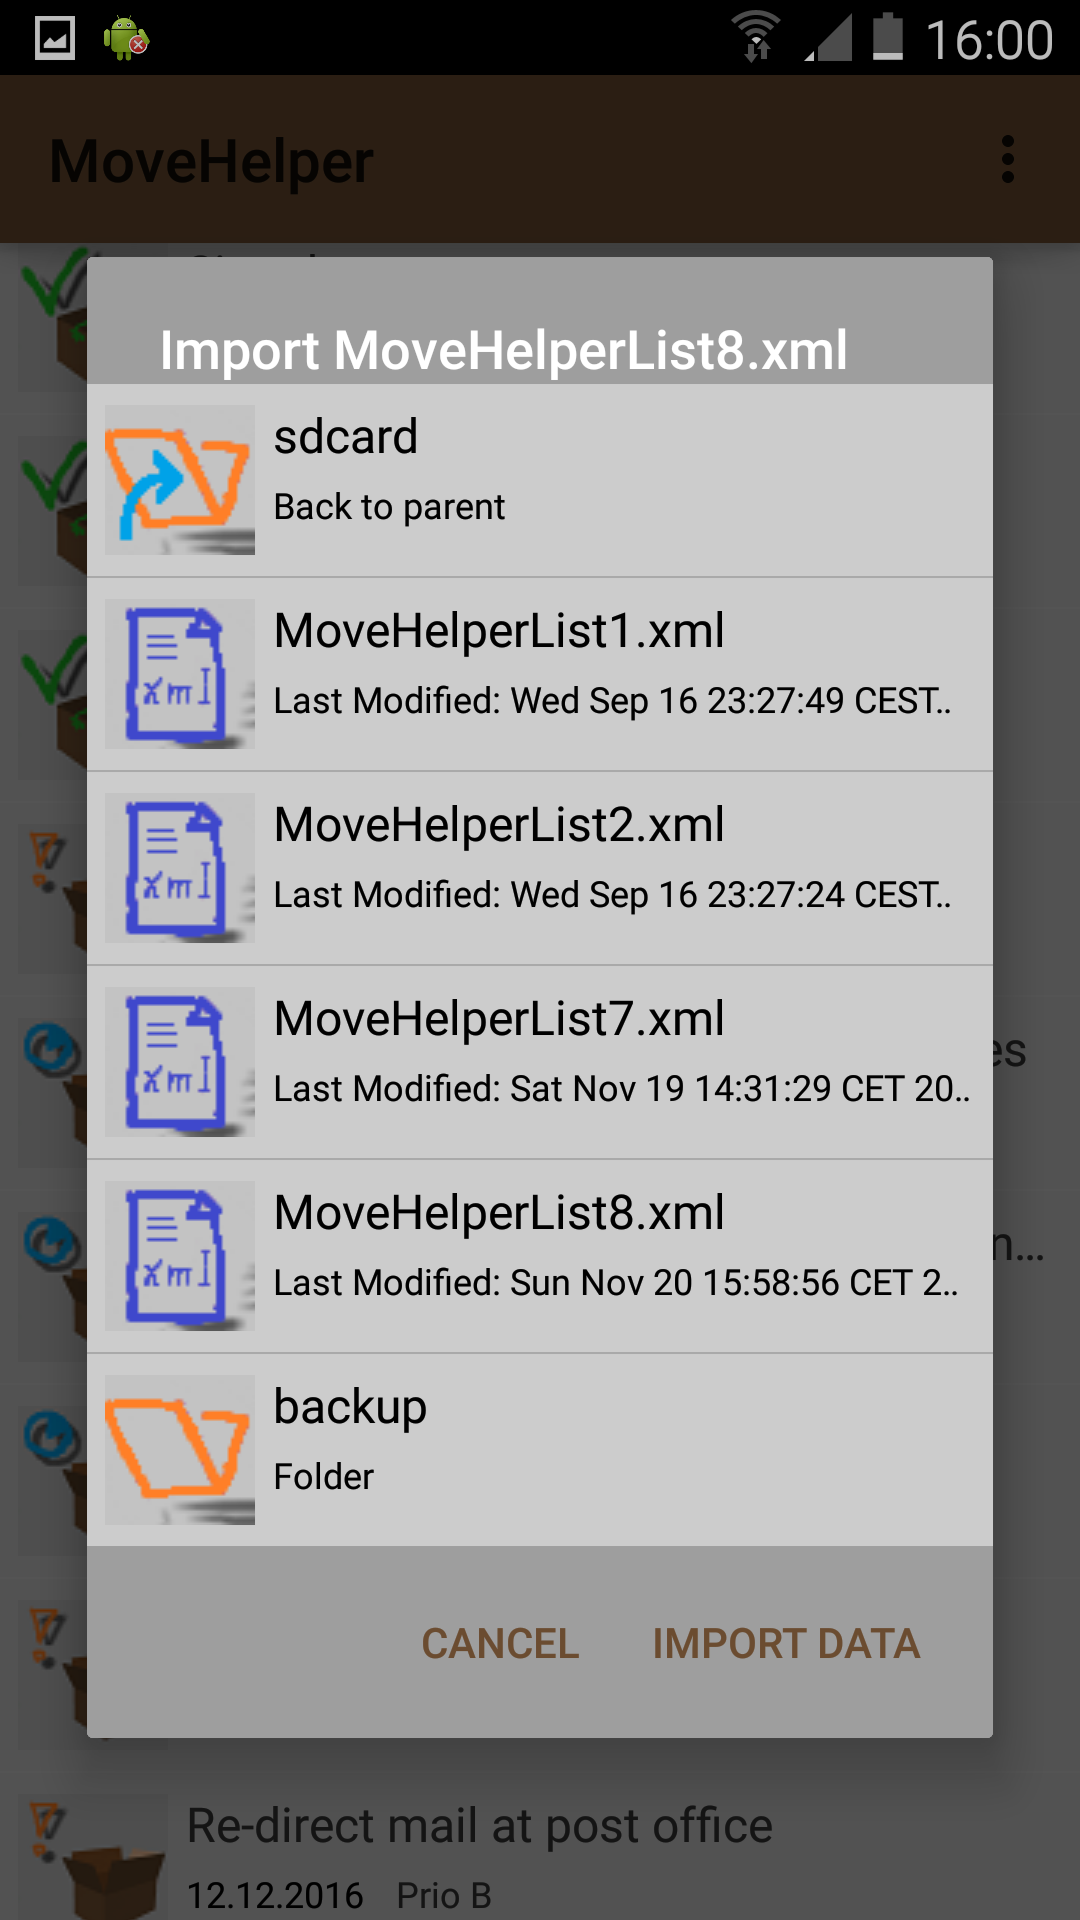 MoveHelper: Import the check list for your move